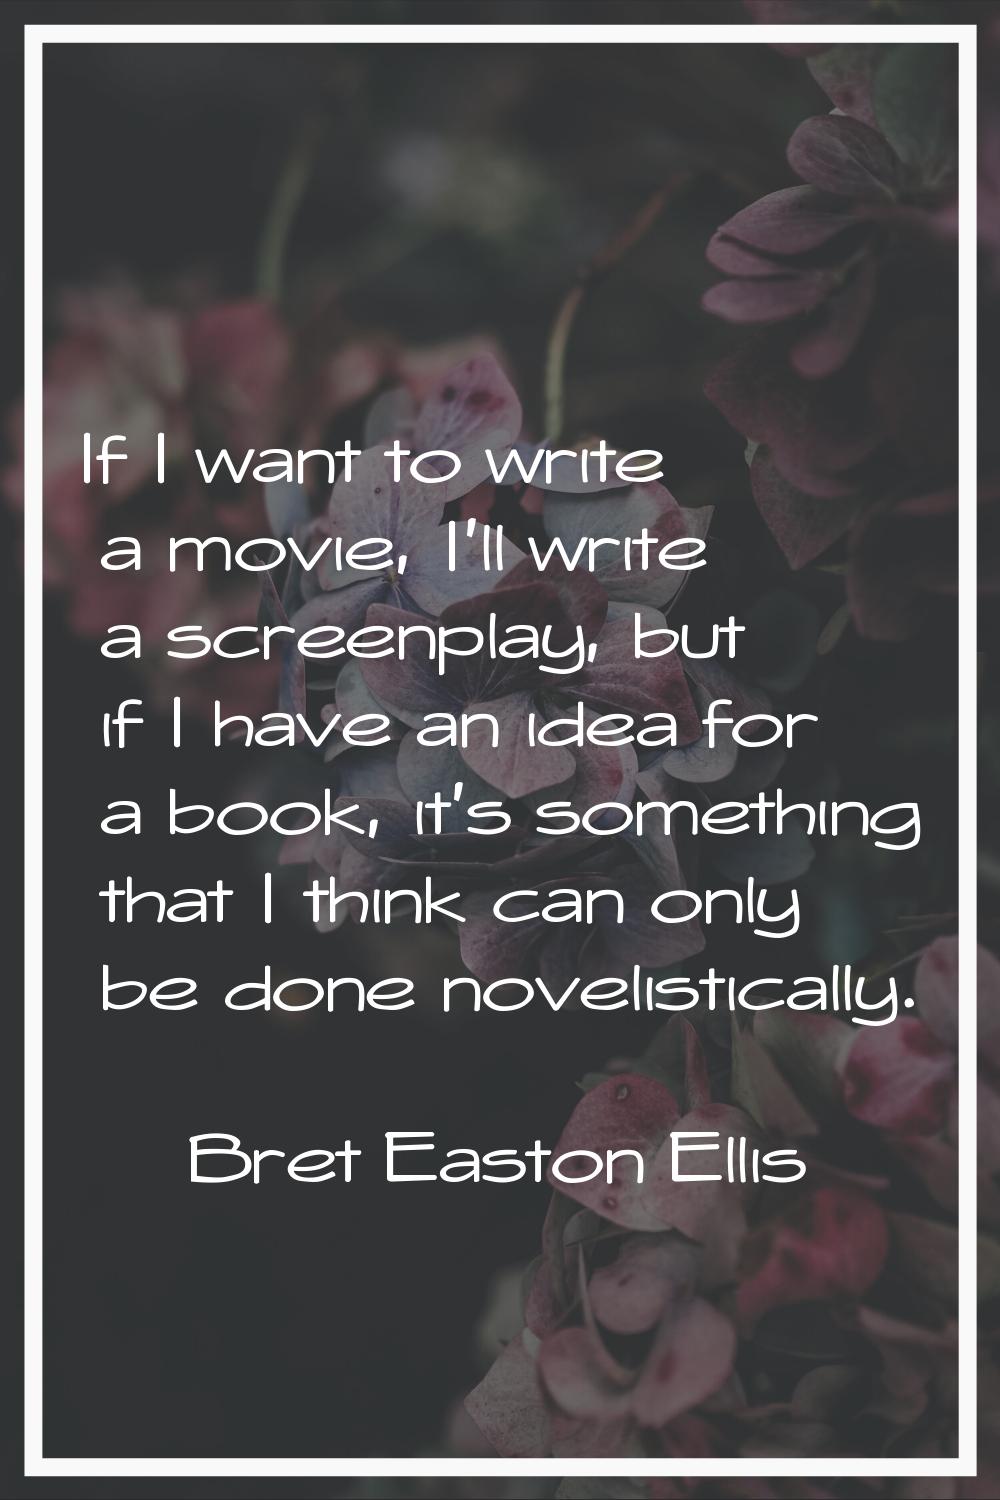 If I want to write a movie, I'll write a screenplay, but if I have an idea for a book, it's somethi